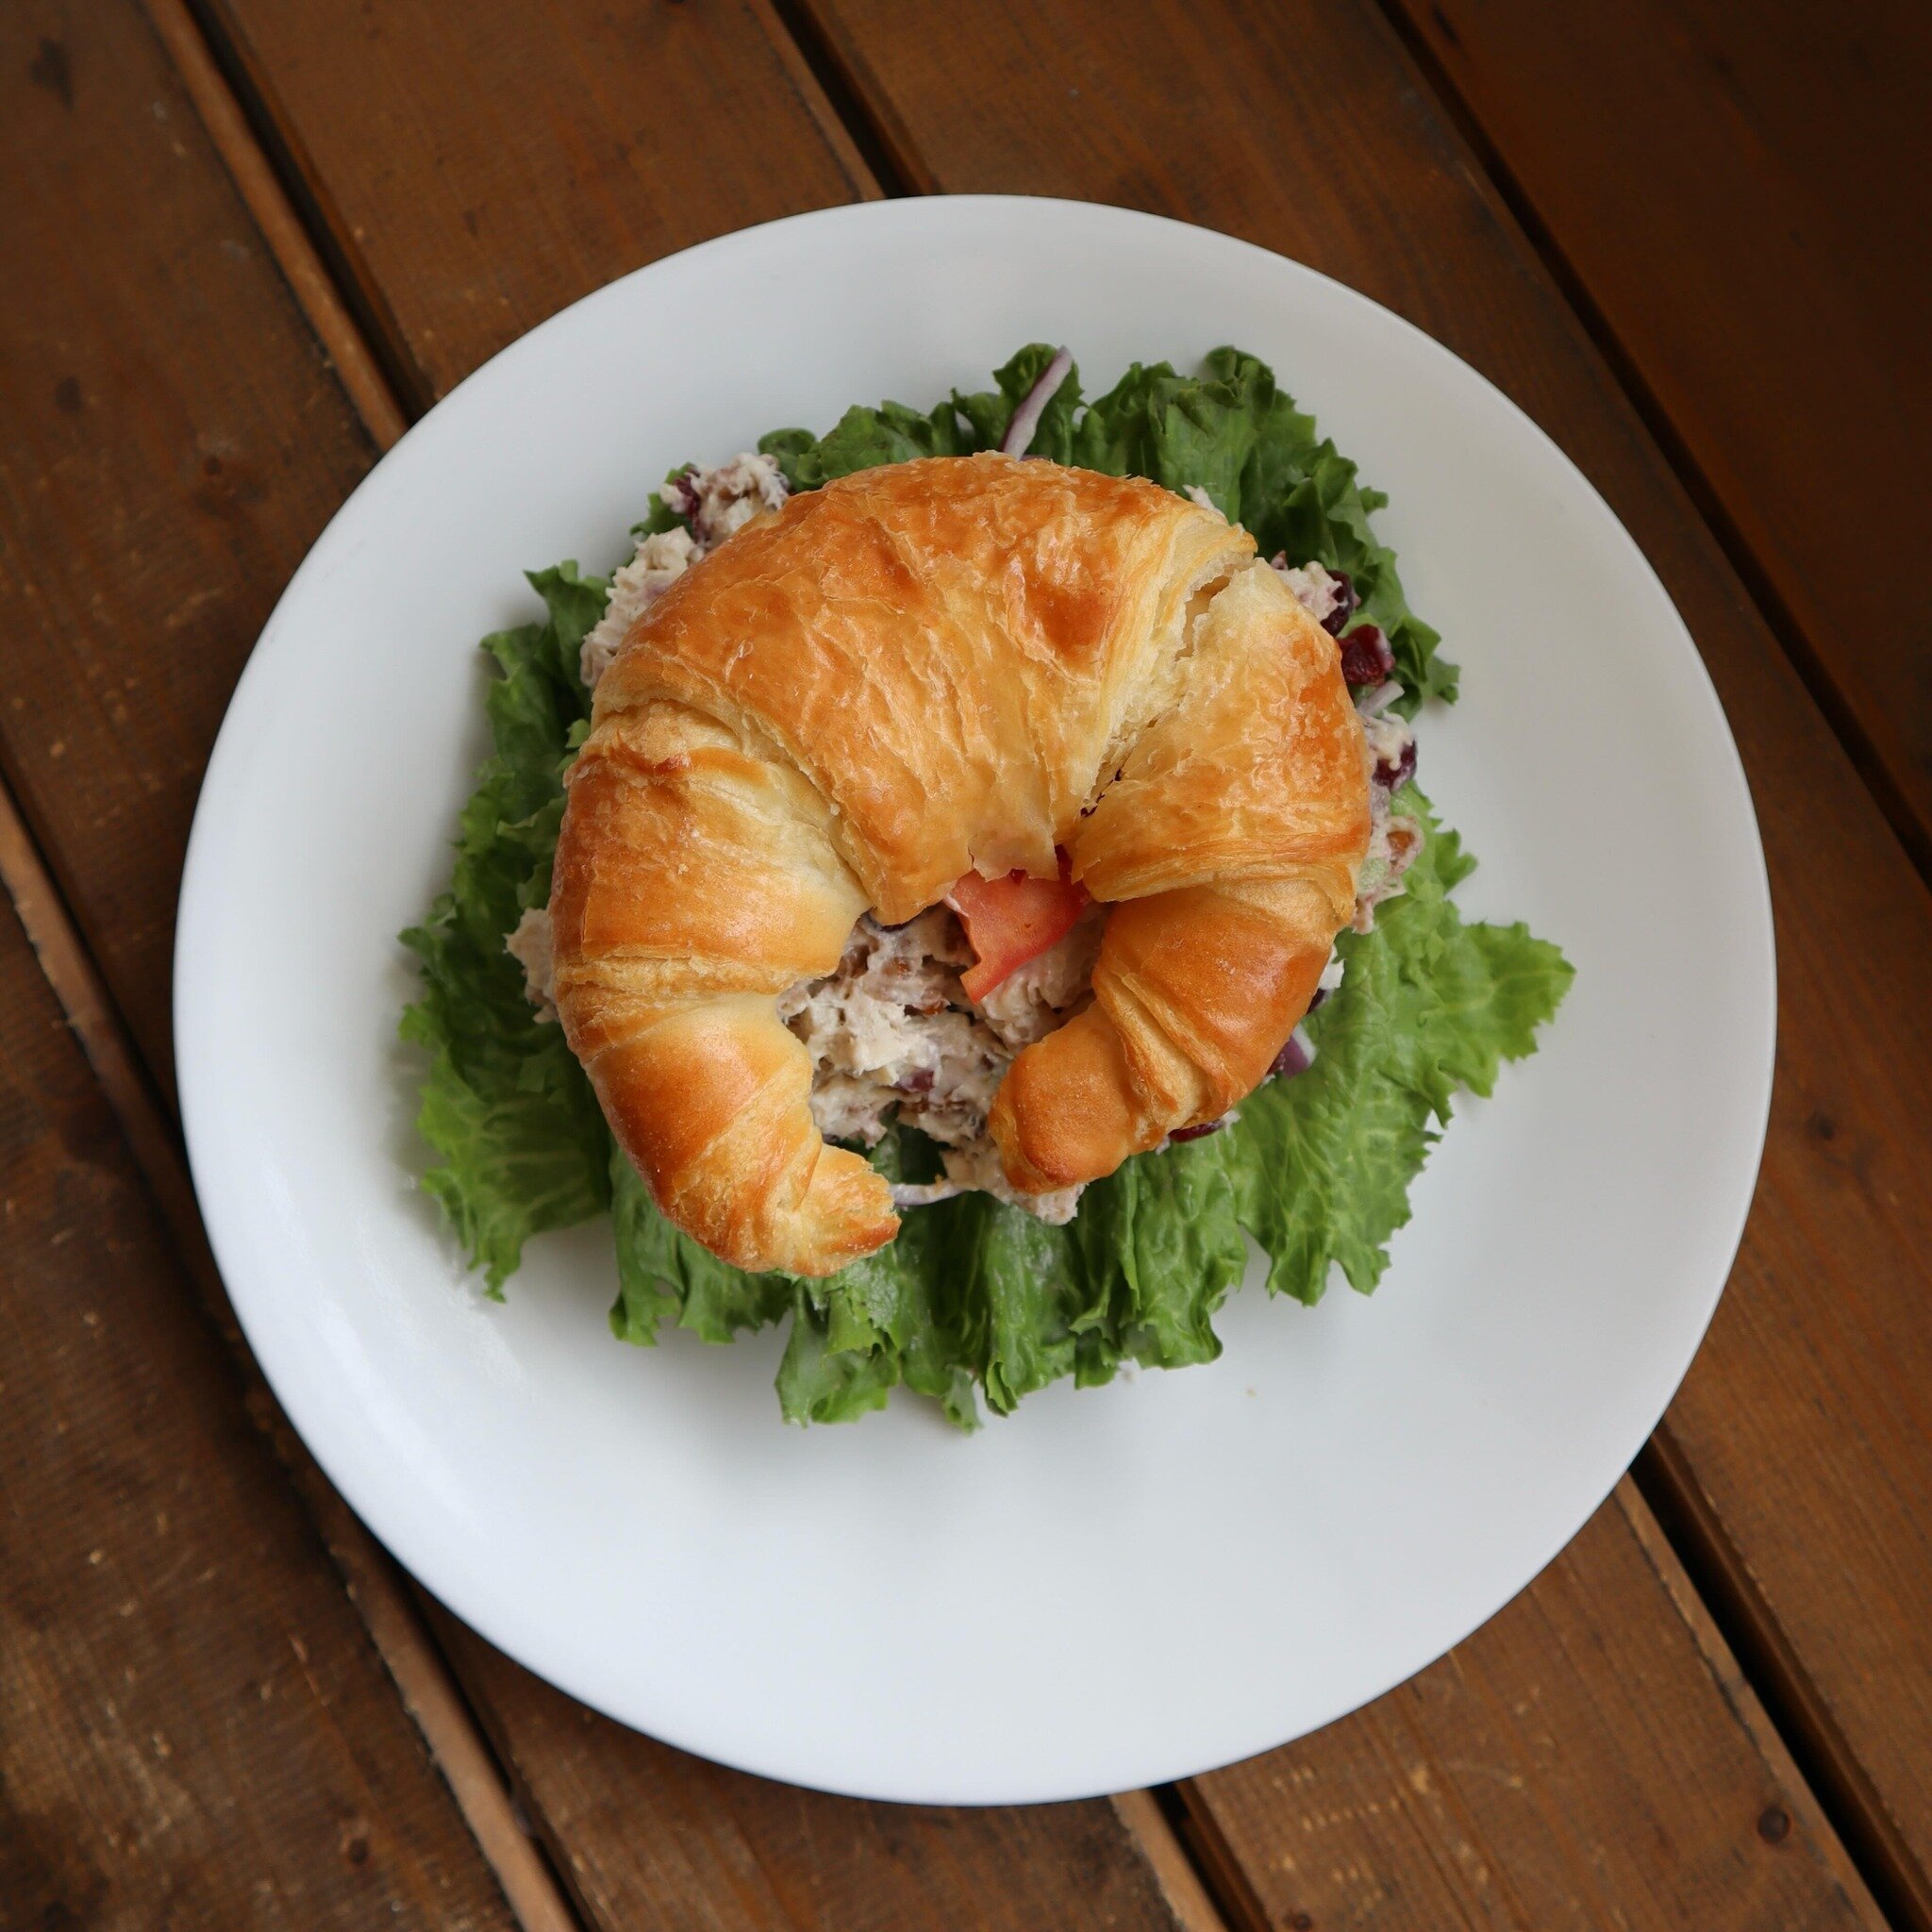 We have some fun new specials on the menu this week!! First up: homemade cranberry walnut chicken salad on a croissant! 

Stay tuned! 

#southportgeneralstore #southportmaine #midcoastmaine #boothbayharbor